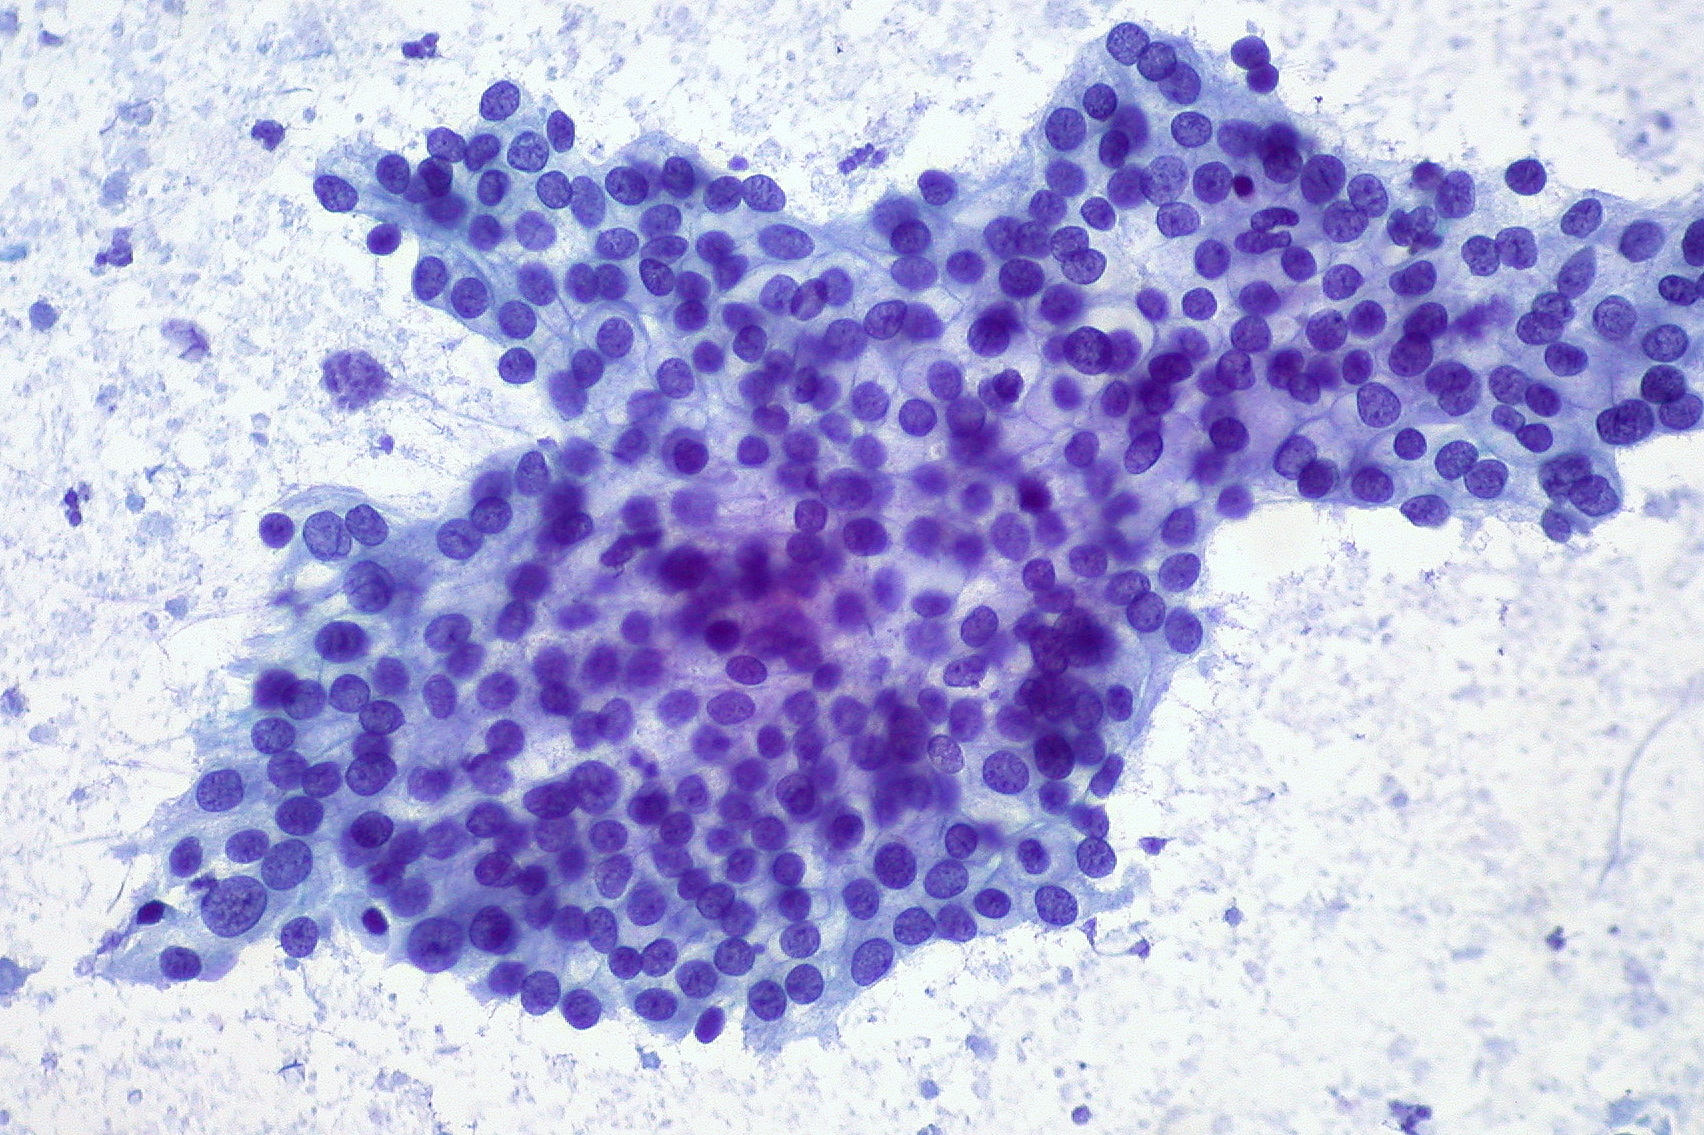 Adenocarcinoma of the pancreas. The dark purple circles in the center are the nuclei of cancer cells (e.g. a tumor)